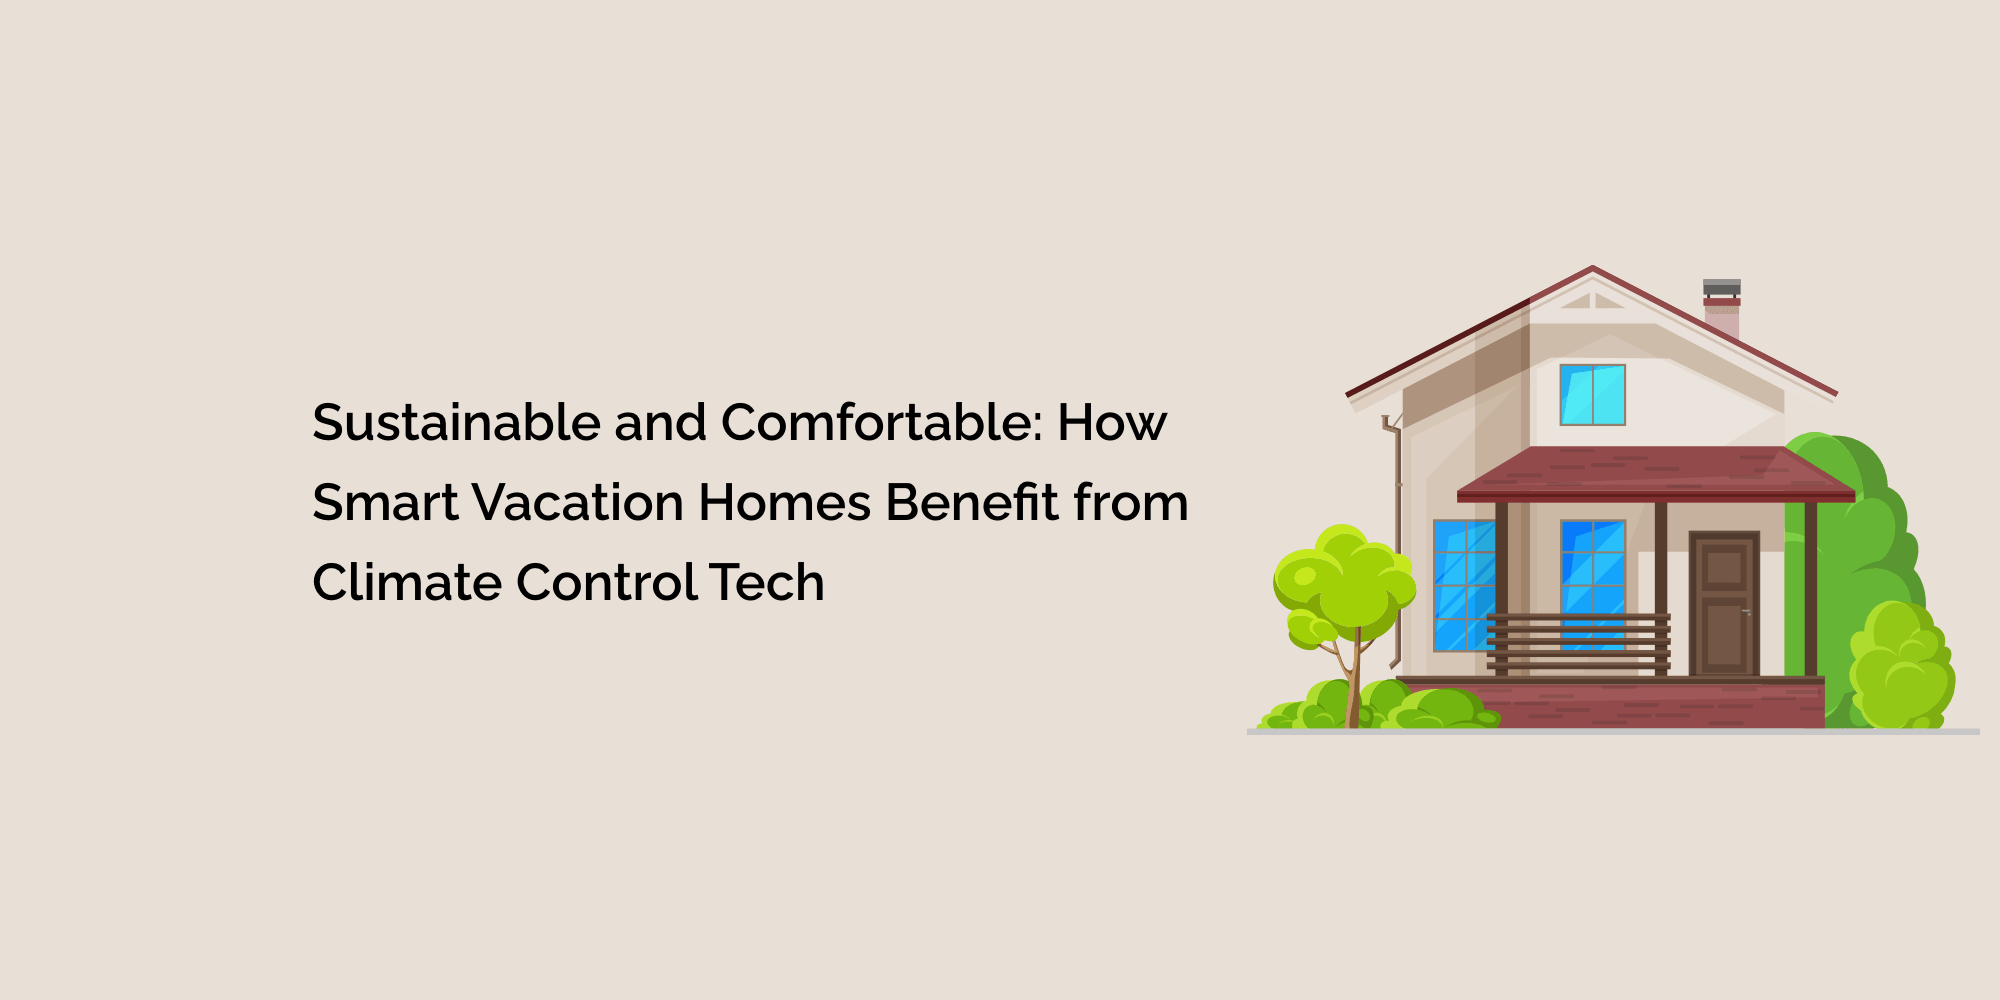 Sustainable and Comfortable: How Smart Vacation Homes Benefit from Climate Control Tech